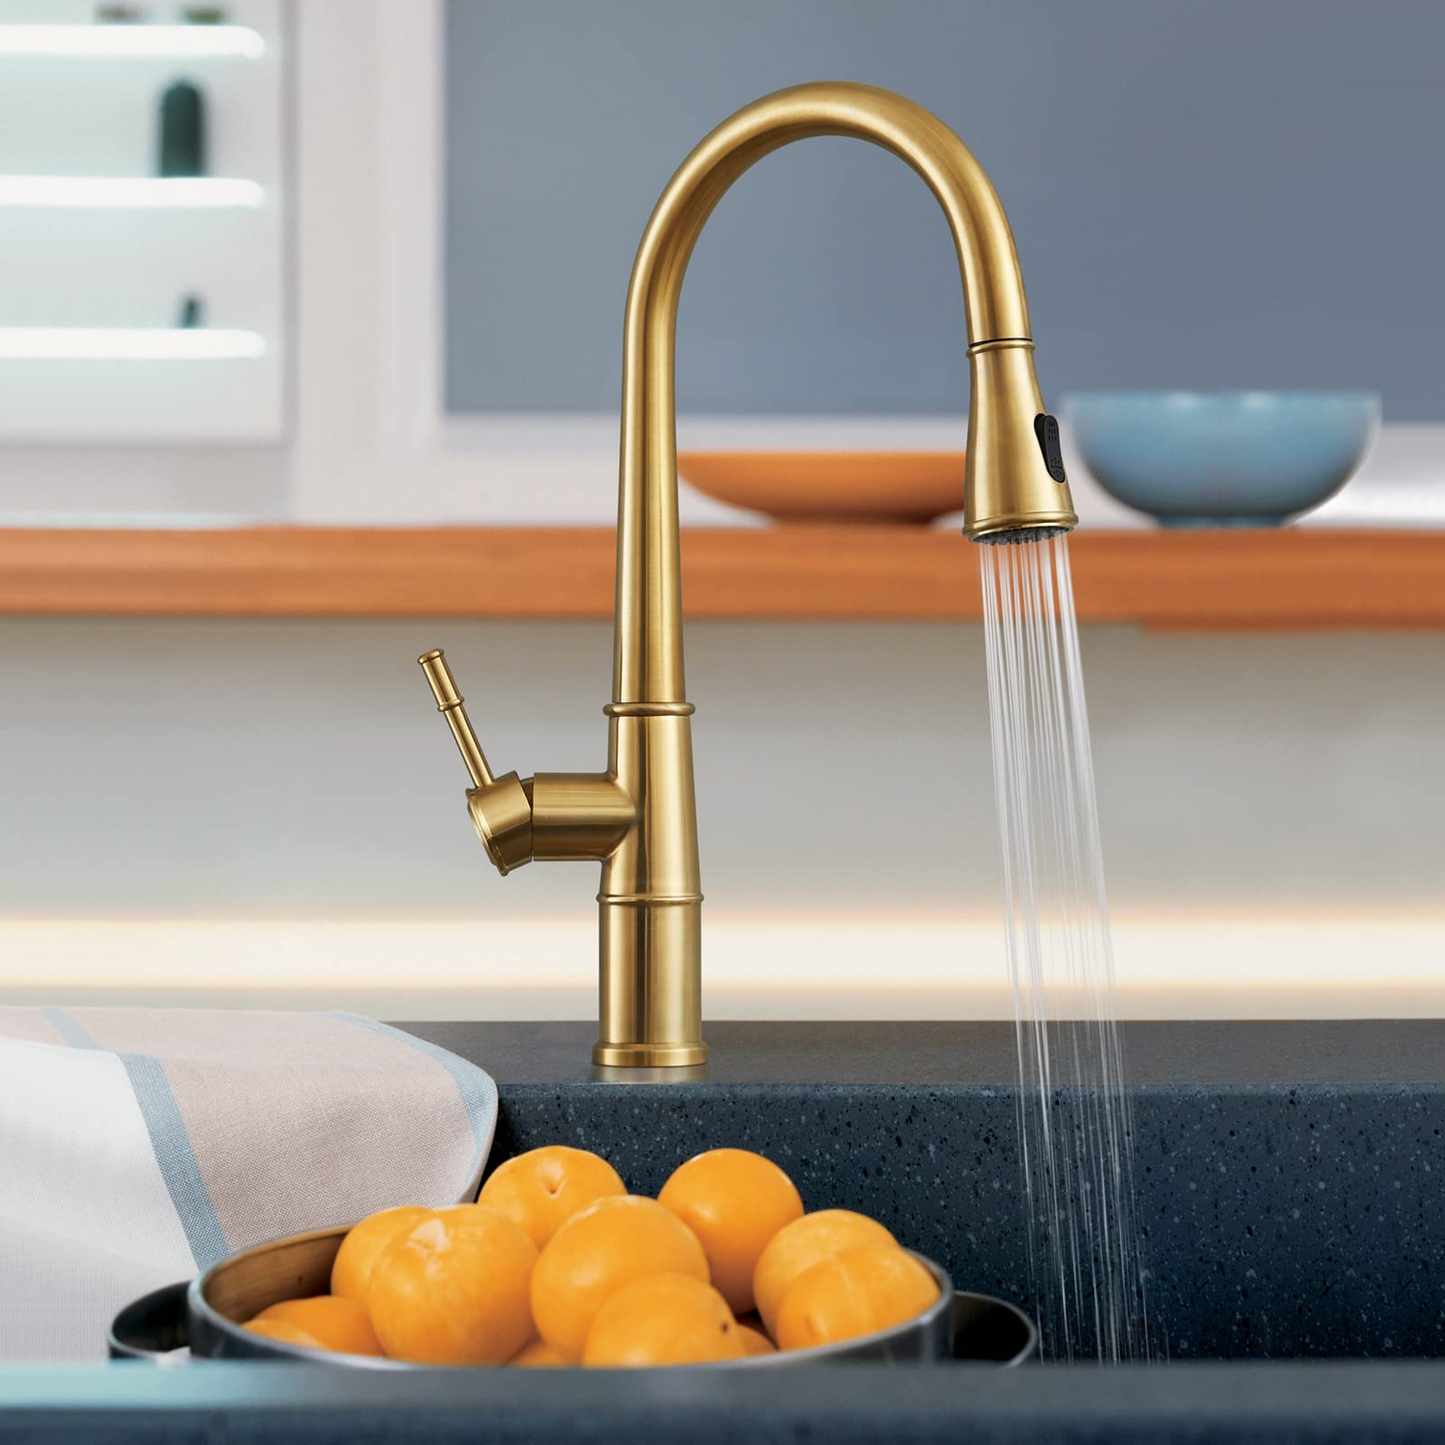 AvaMalis A|M Aquae Gold Kitchen Faucet with Pull Down Sprayer; Brushed Gold Kitchen Sink Faucets 1Handle Single Hole Deck Mount High Arc 360 Degree Swivel Pull Out Kitchen Faucets